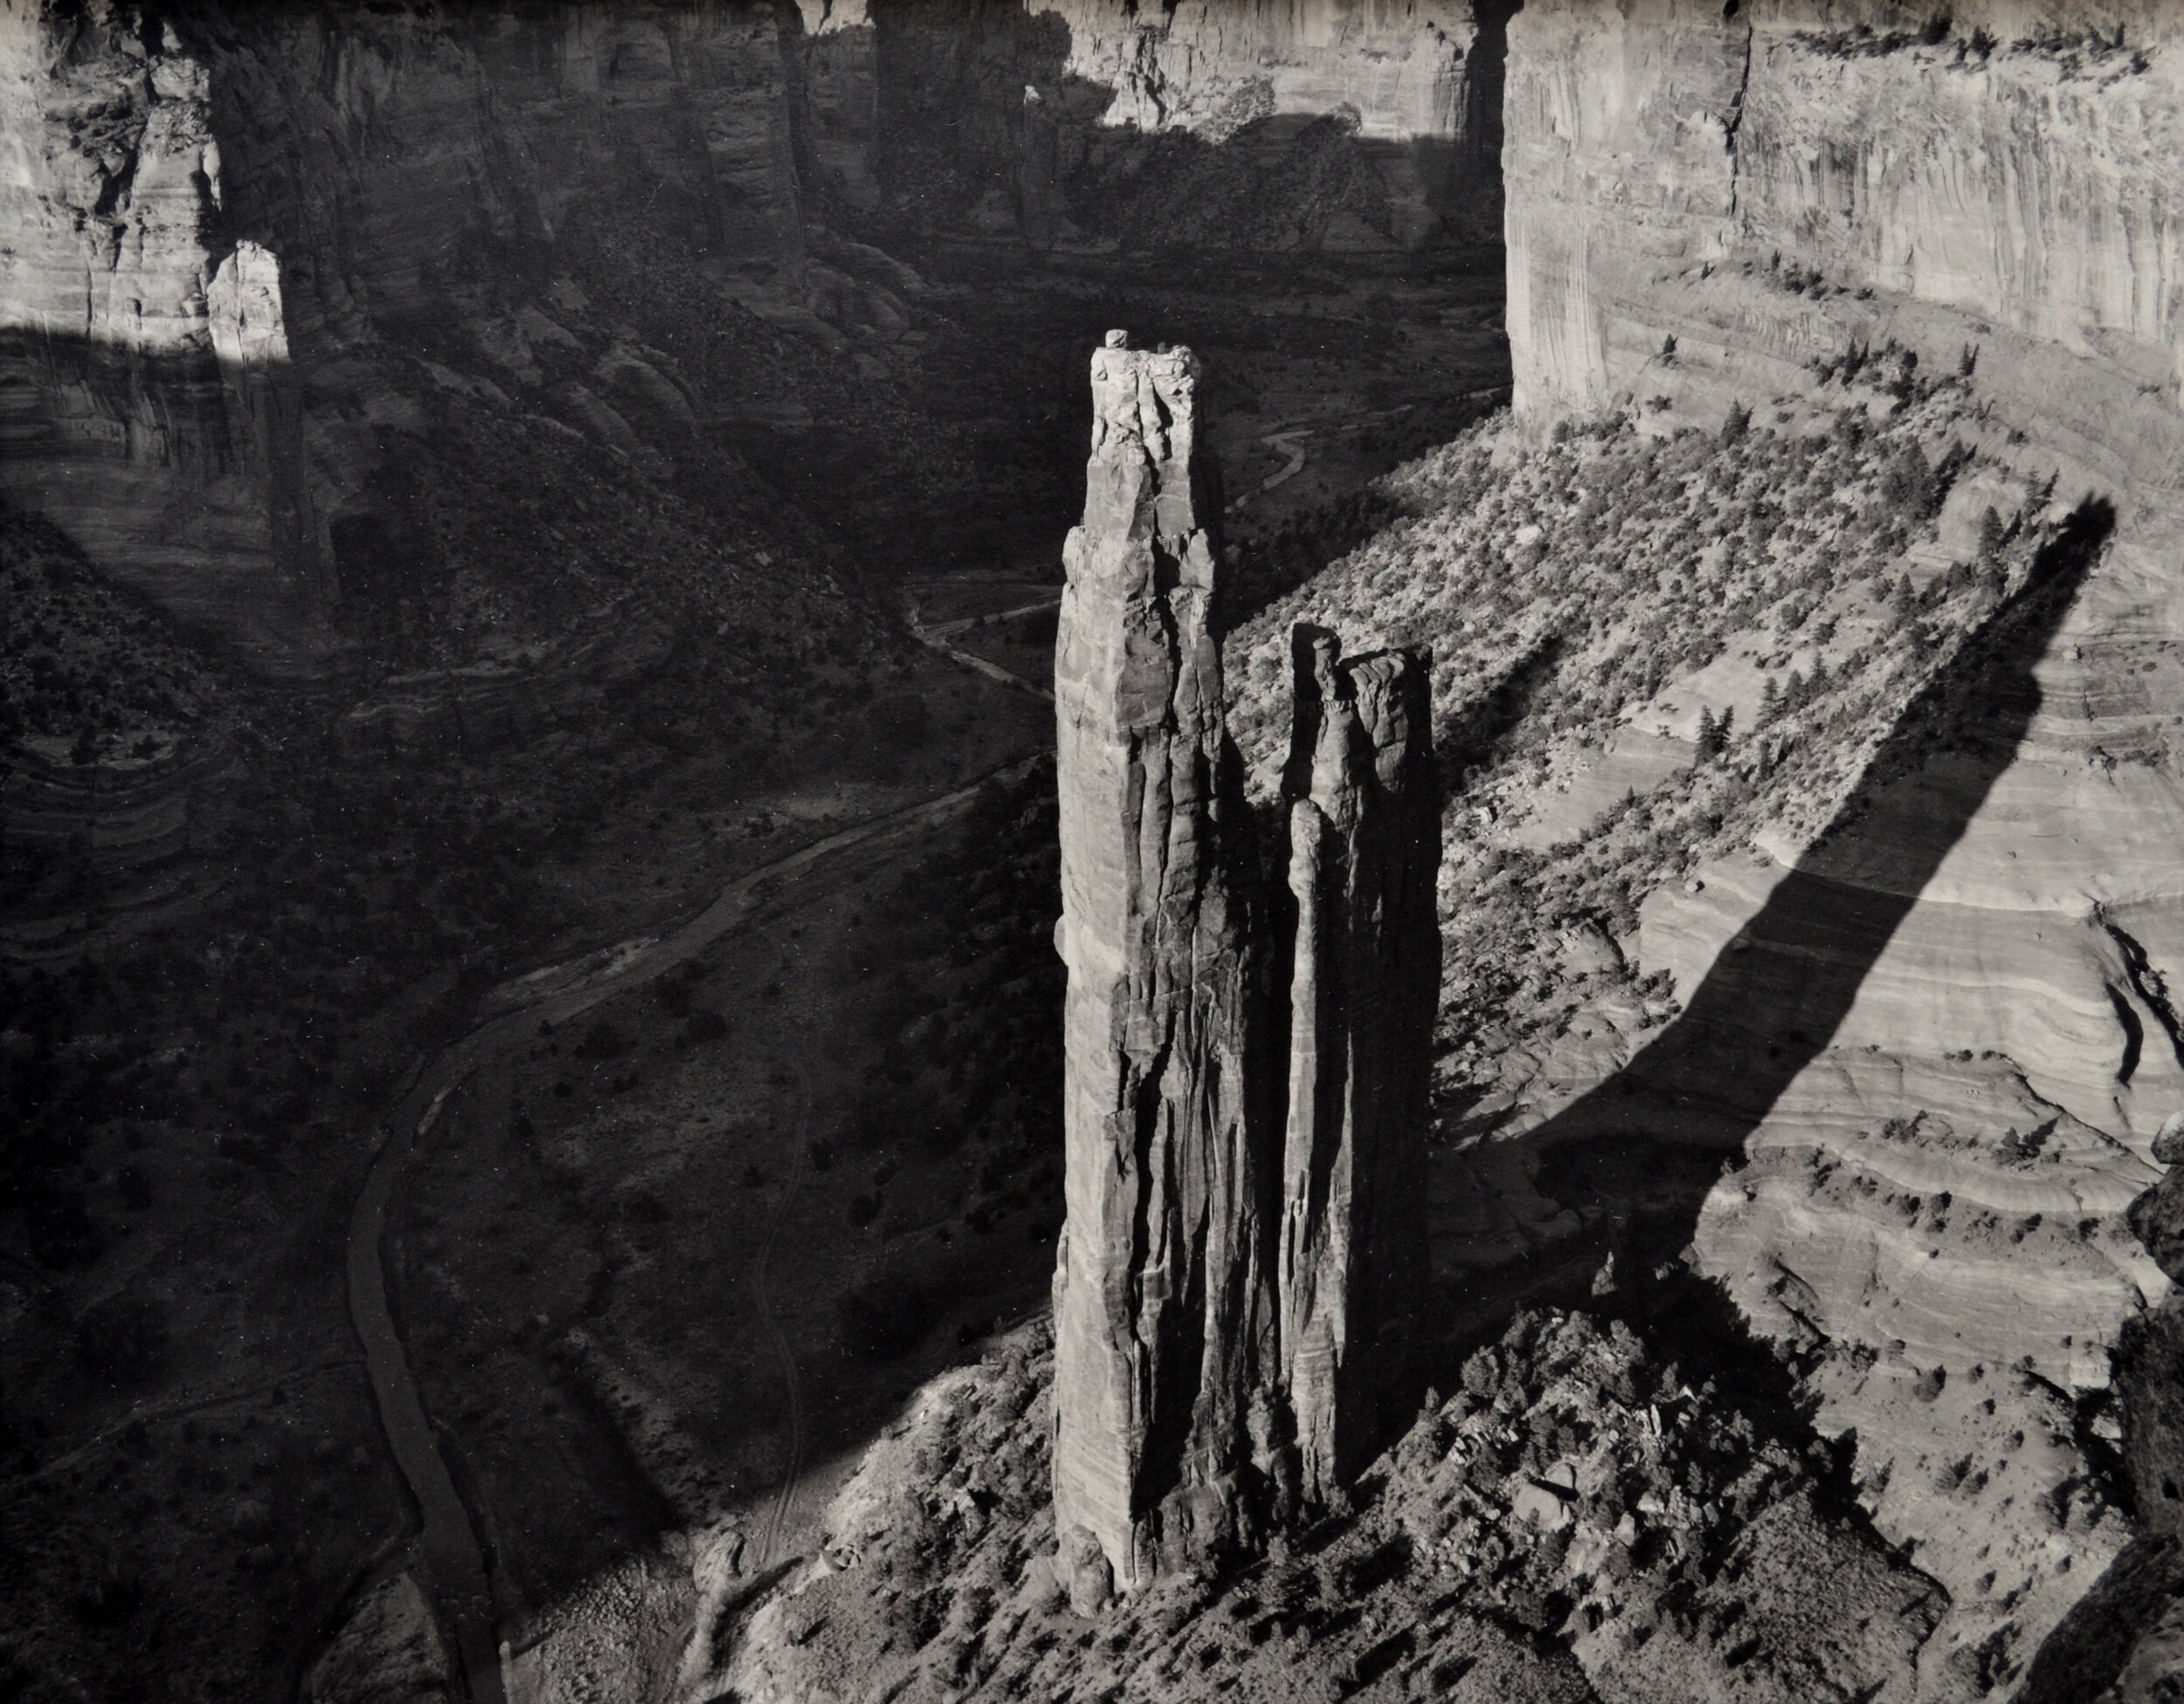 Janet Russek: Hêng - Duration: Spider Rock, Canyon de Chelly, Arizona, 1984